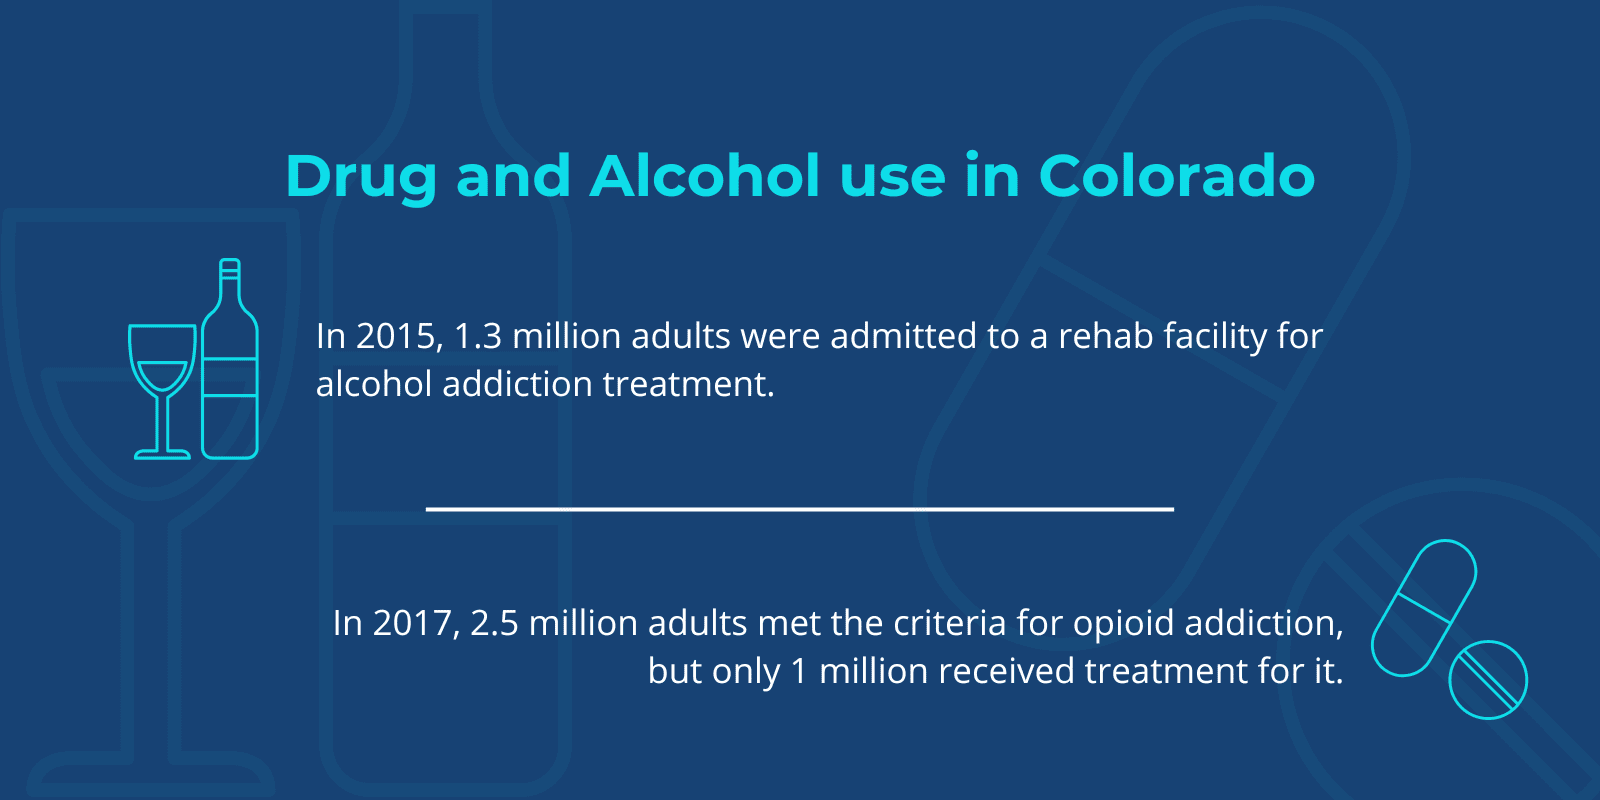 2015 and 2017 Drug and Alcohol use statistics in Colorado